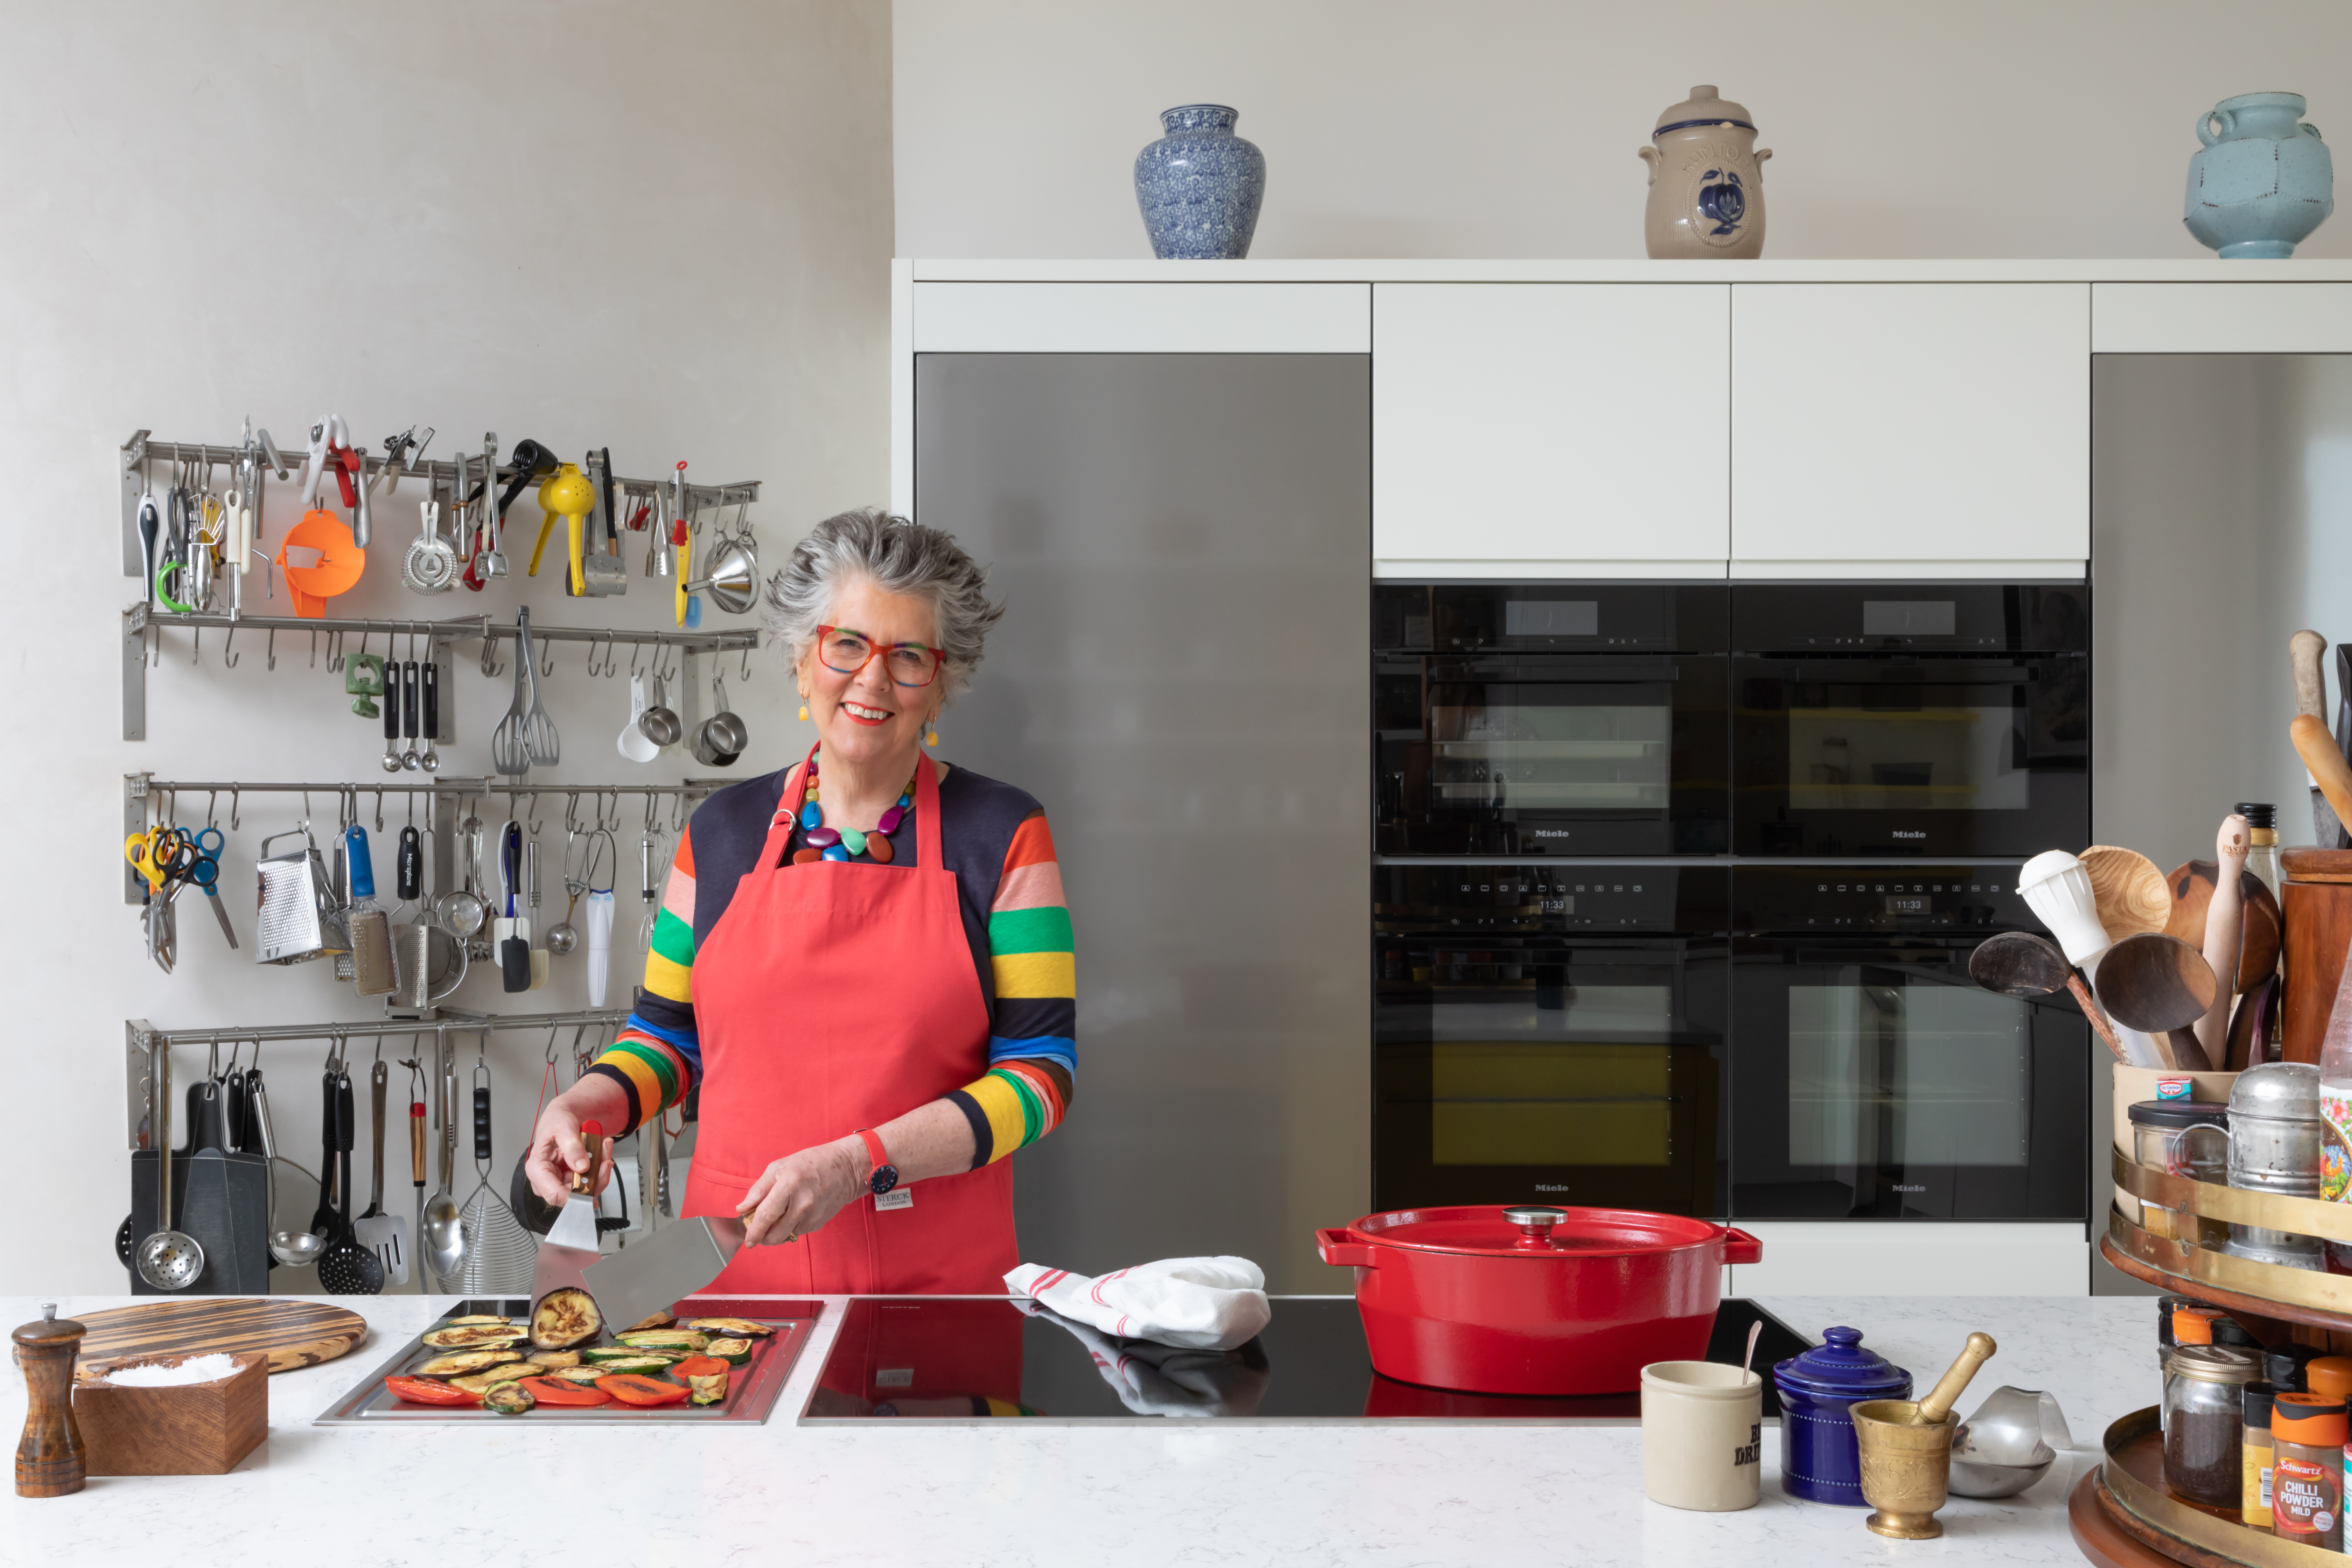 Paul Craig Interior Photographer, People Photography, Prue Leith cooking in her kitchen